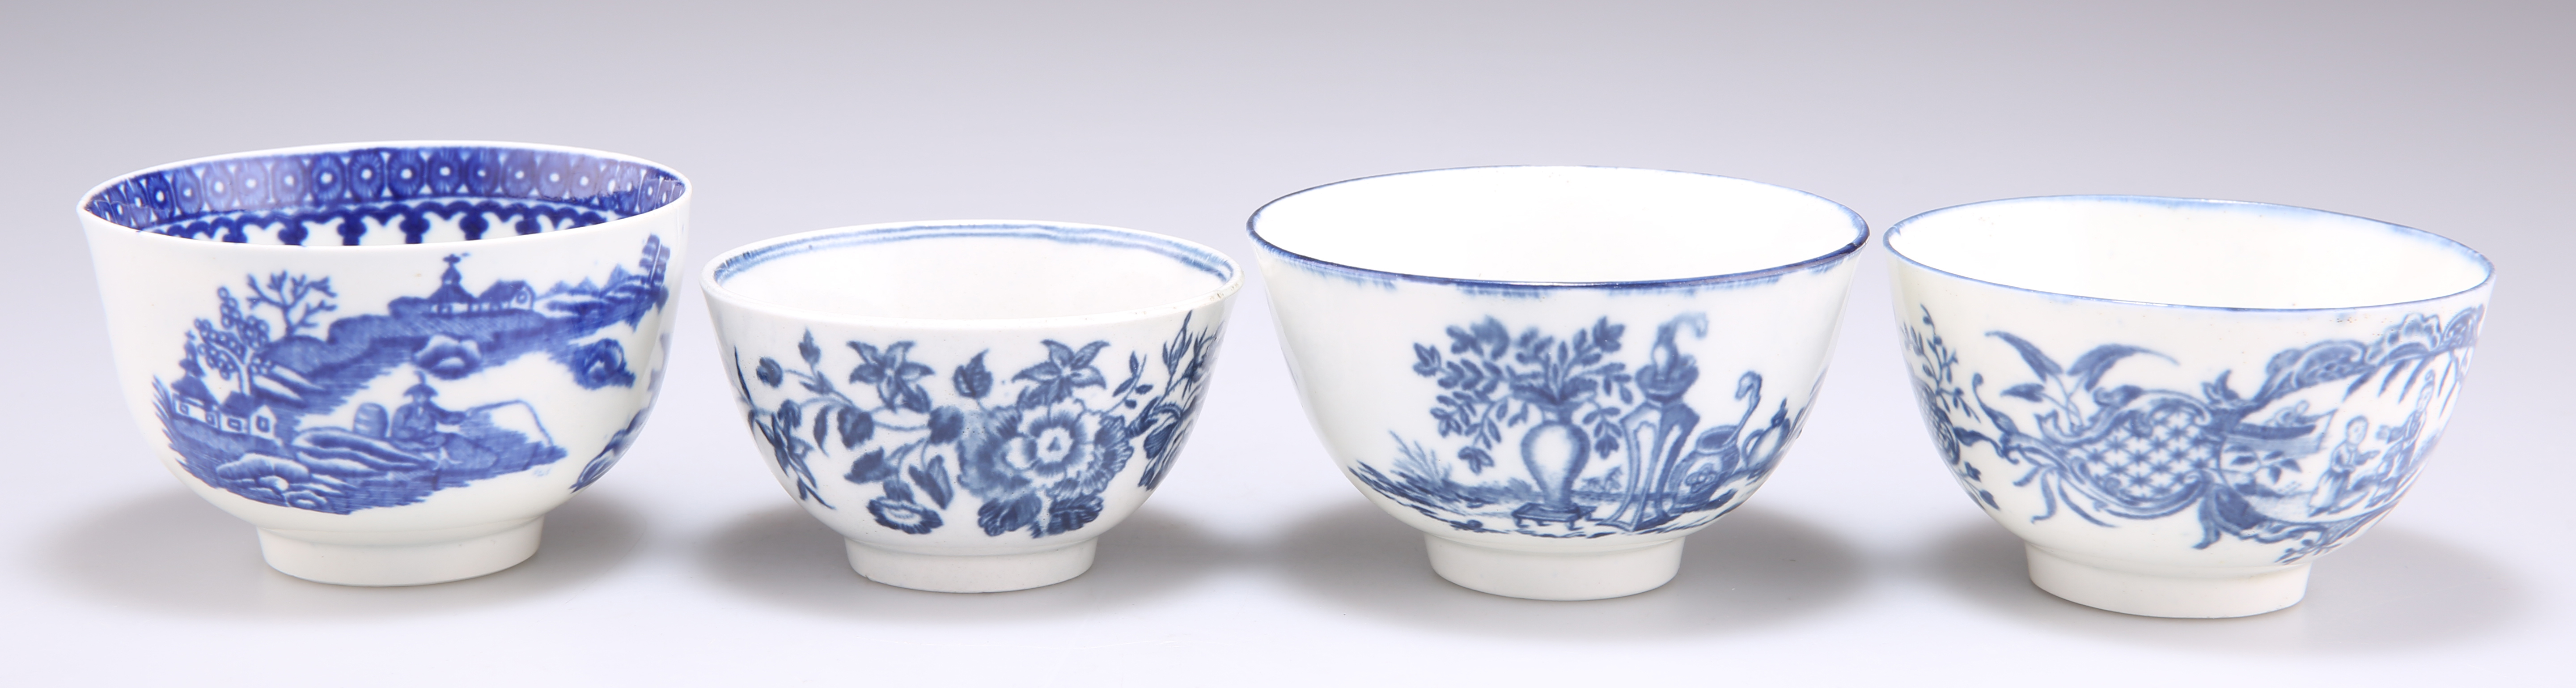 FOUR WORCESTER BLUE AND WHITE TEA BOWLS - Image 2 of 2